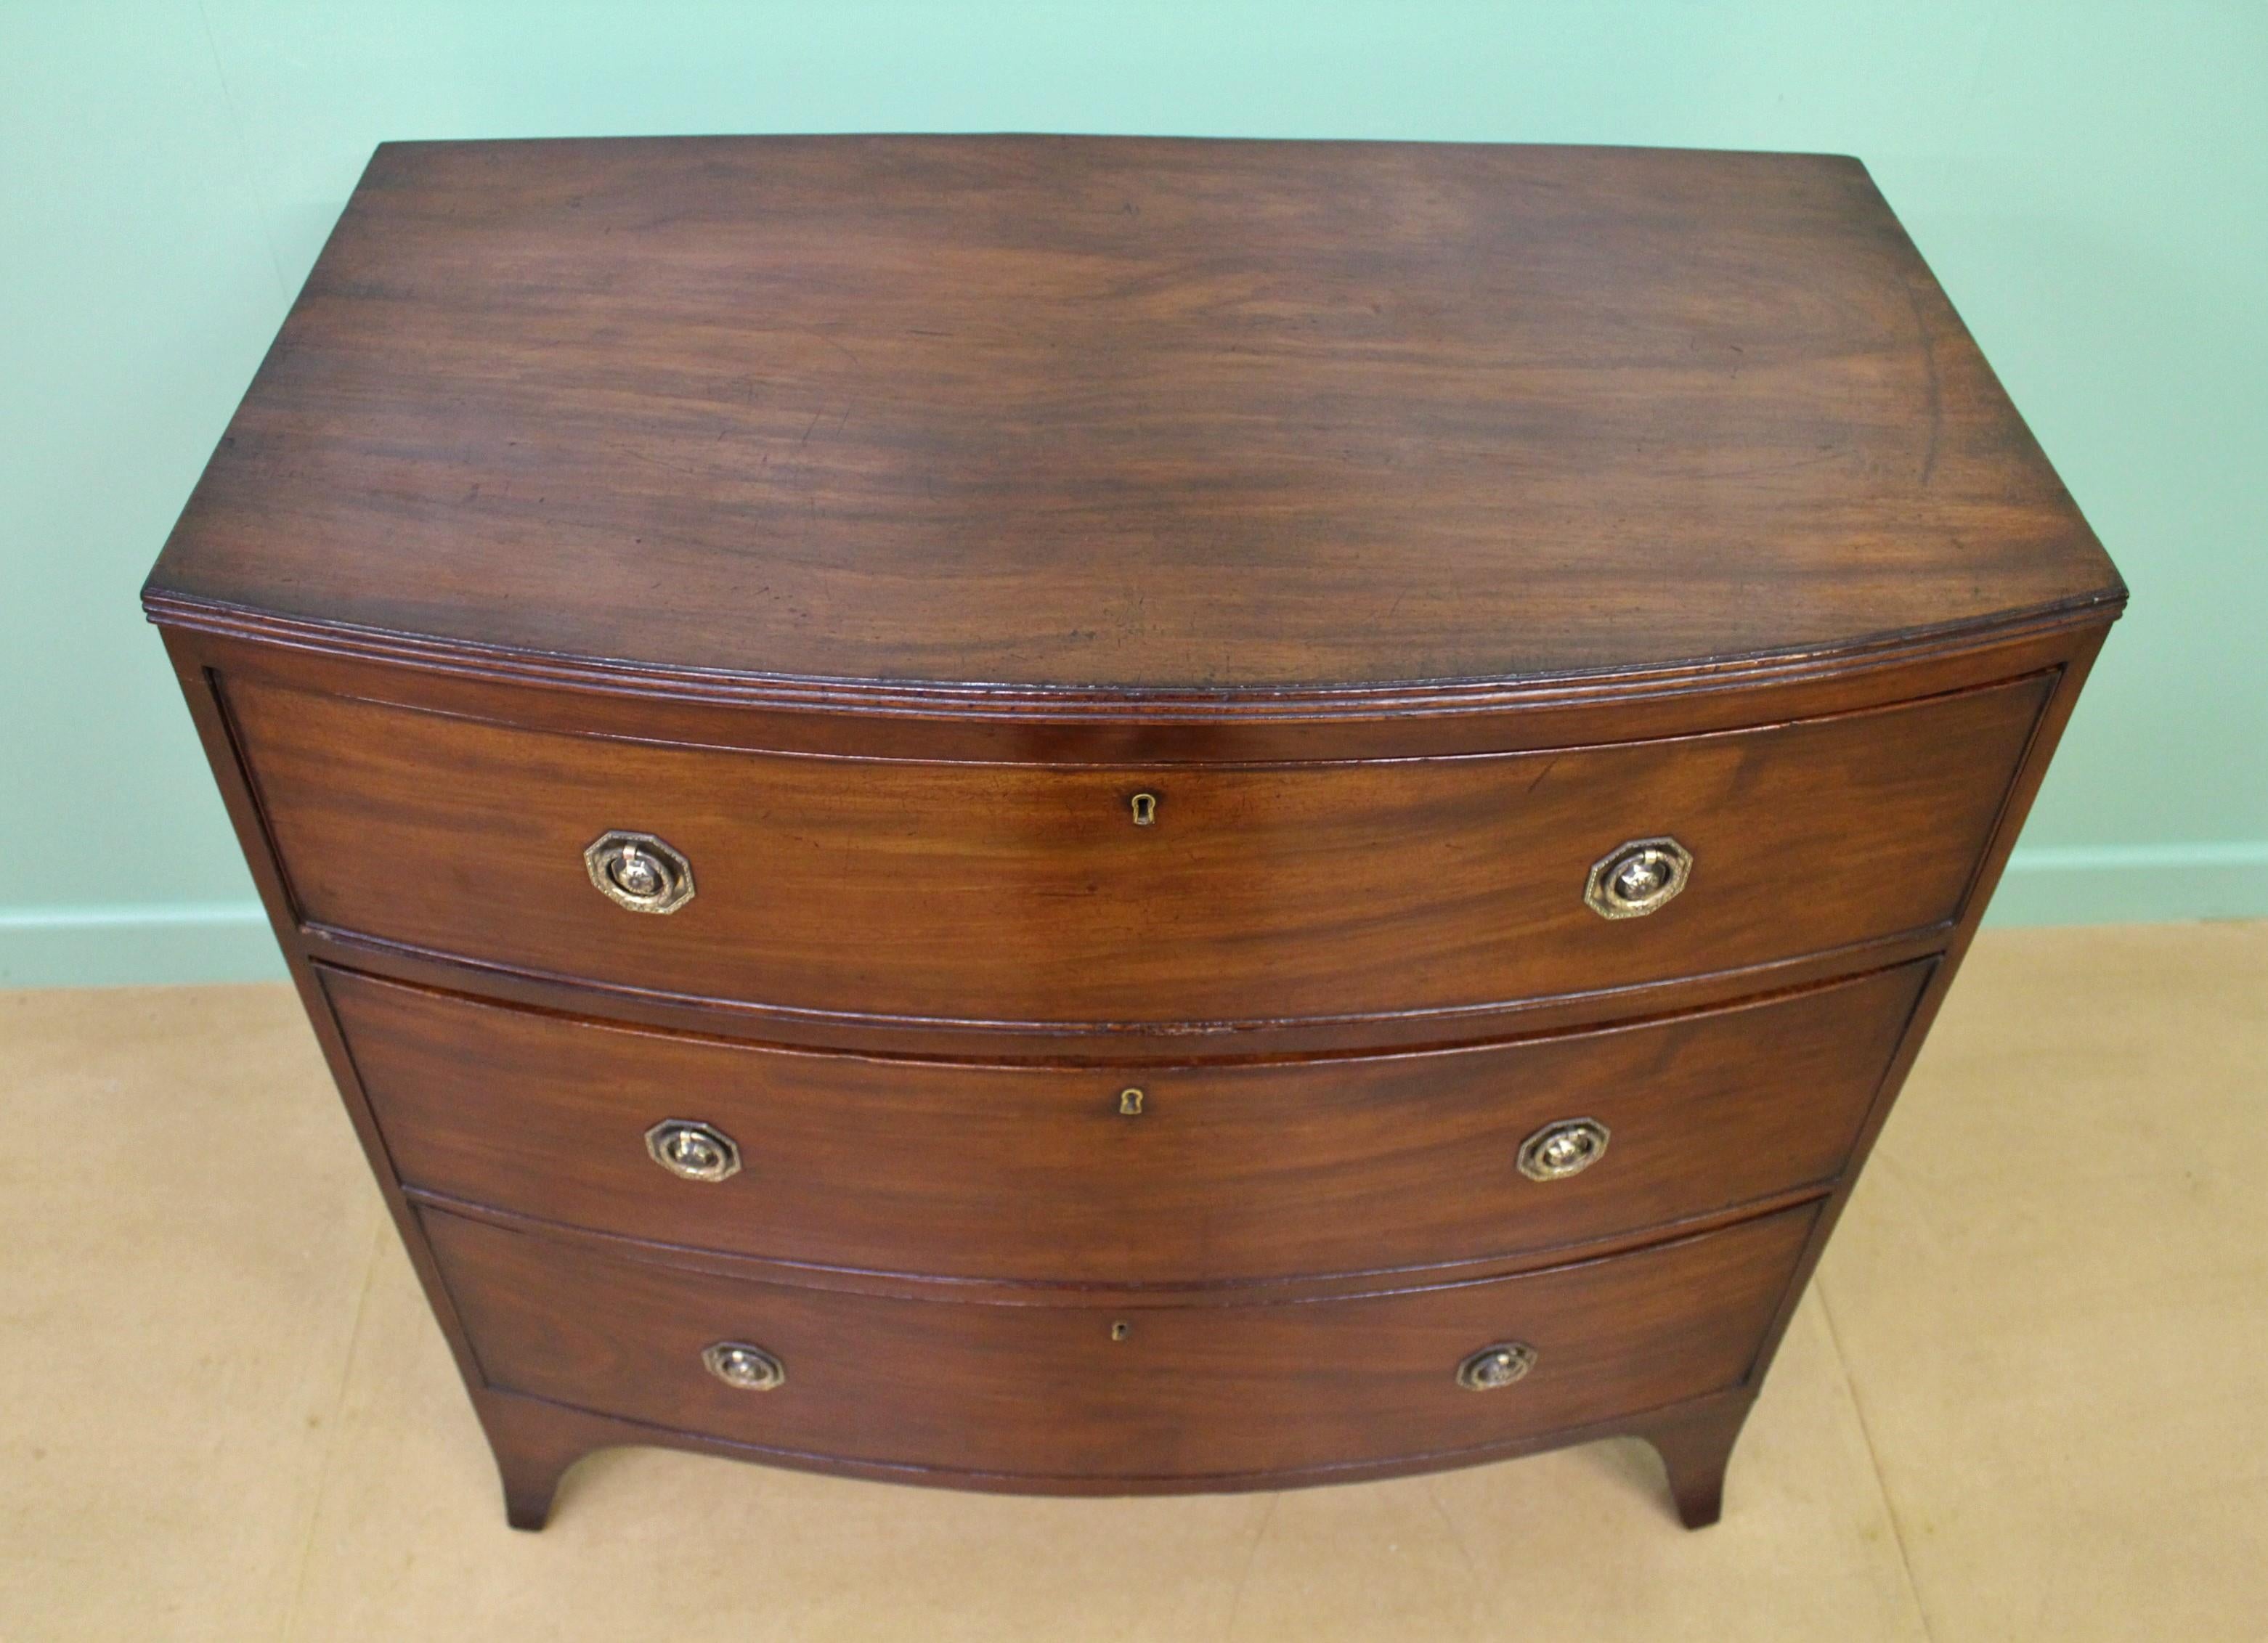 A charming Georgian mahogany bow fronted chest of drawers from the George III period. Well constructed in solid mahogany with attractive mahogany veneers. Of gentle bow fronted form and of compact proportions. With an arrangement of 3 drawers, each